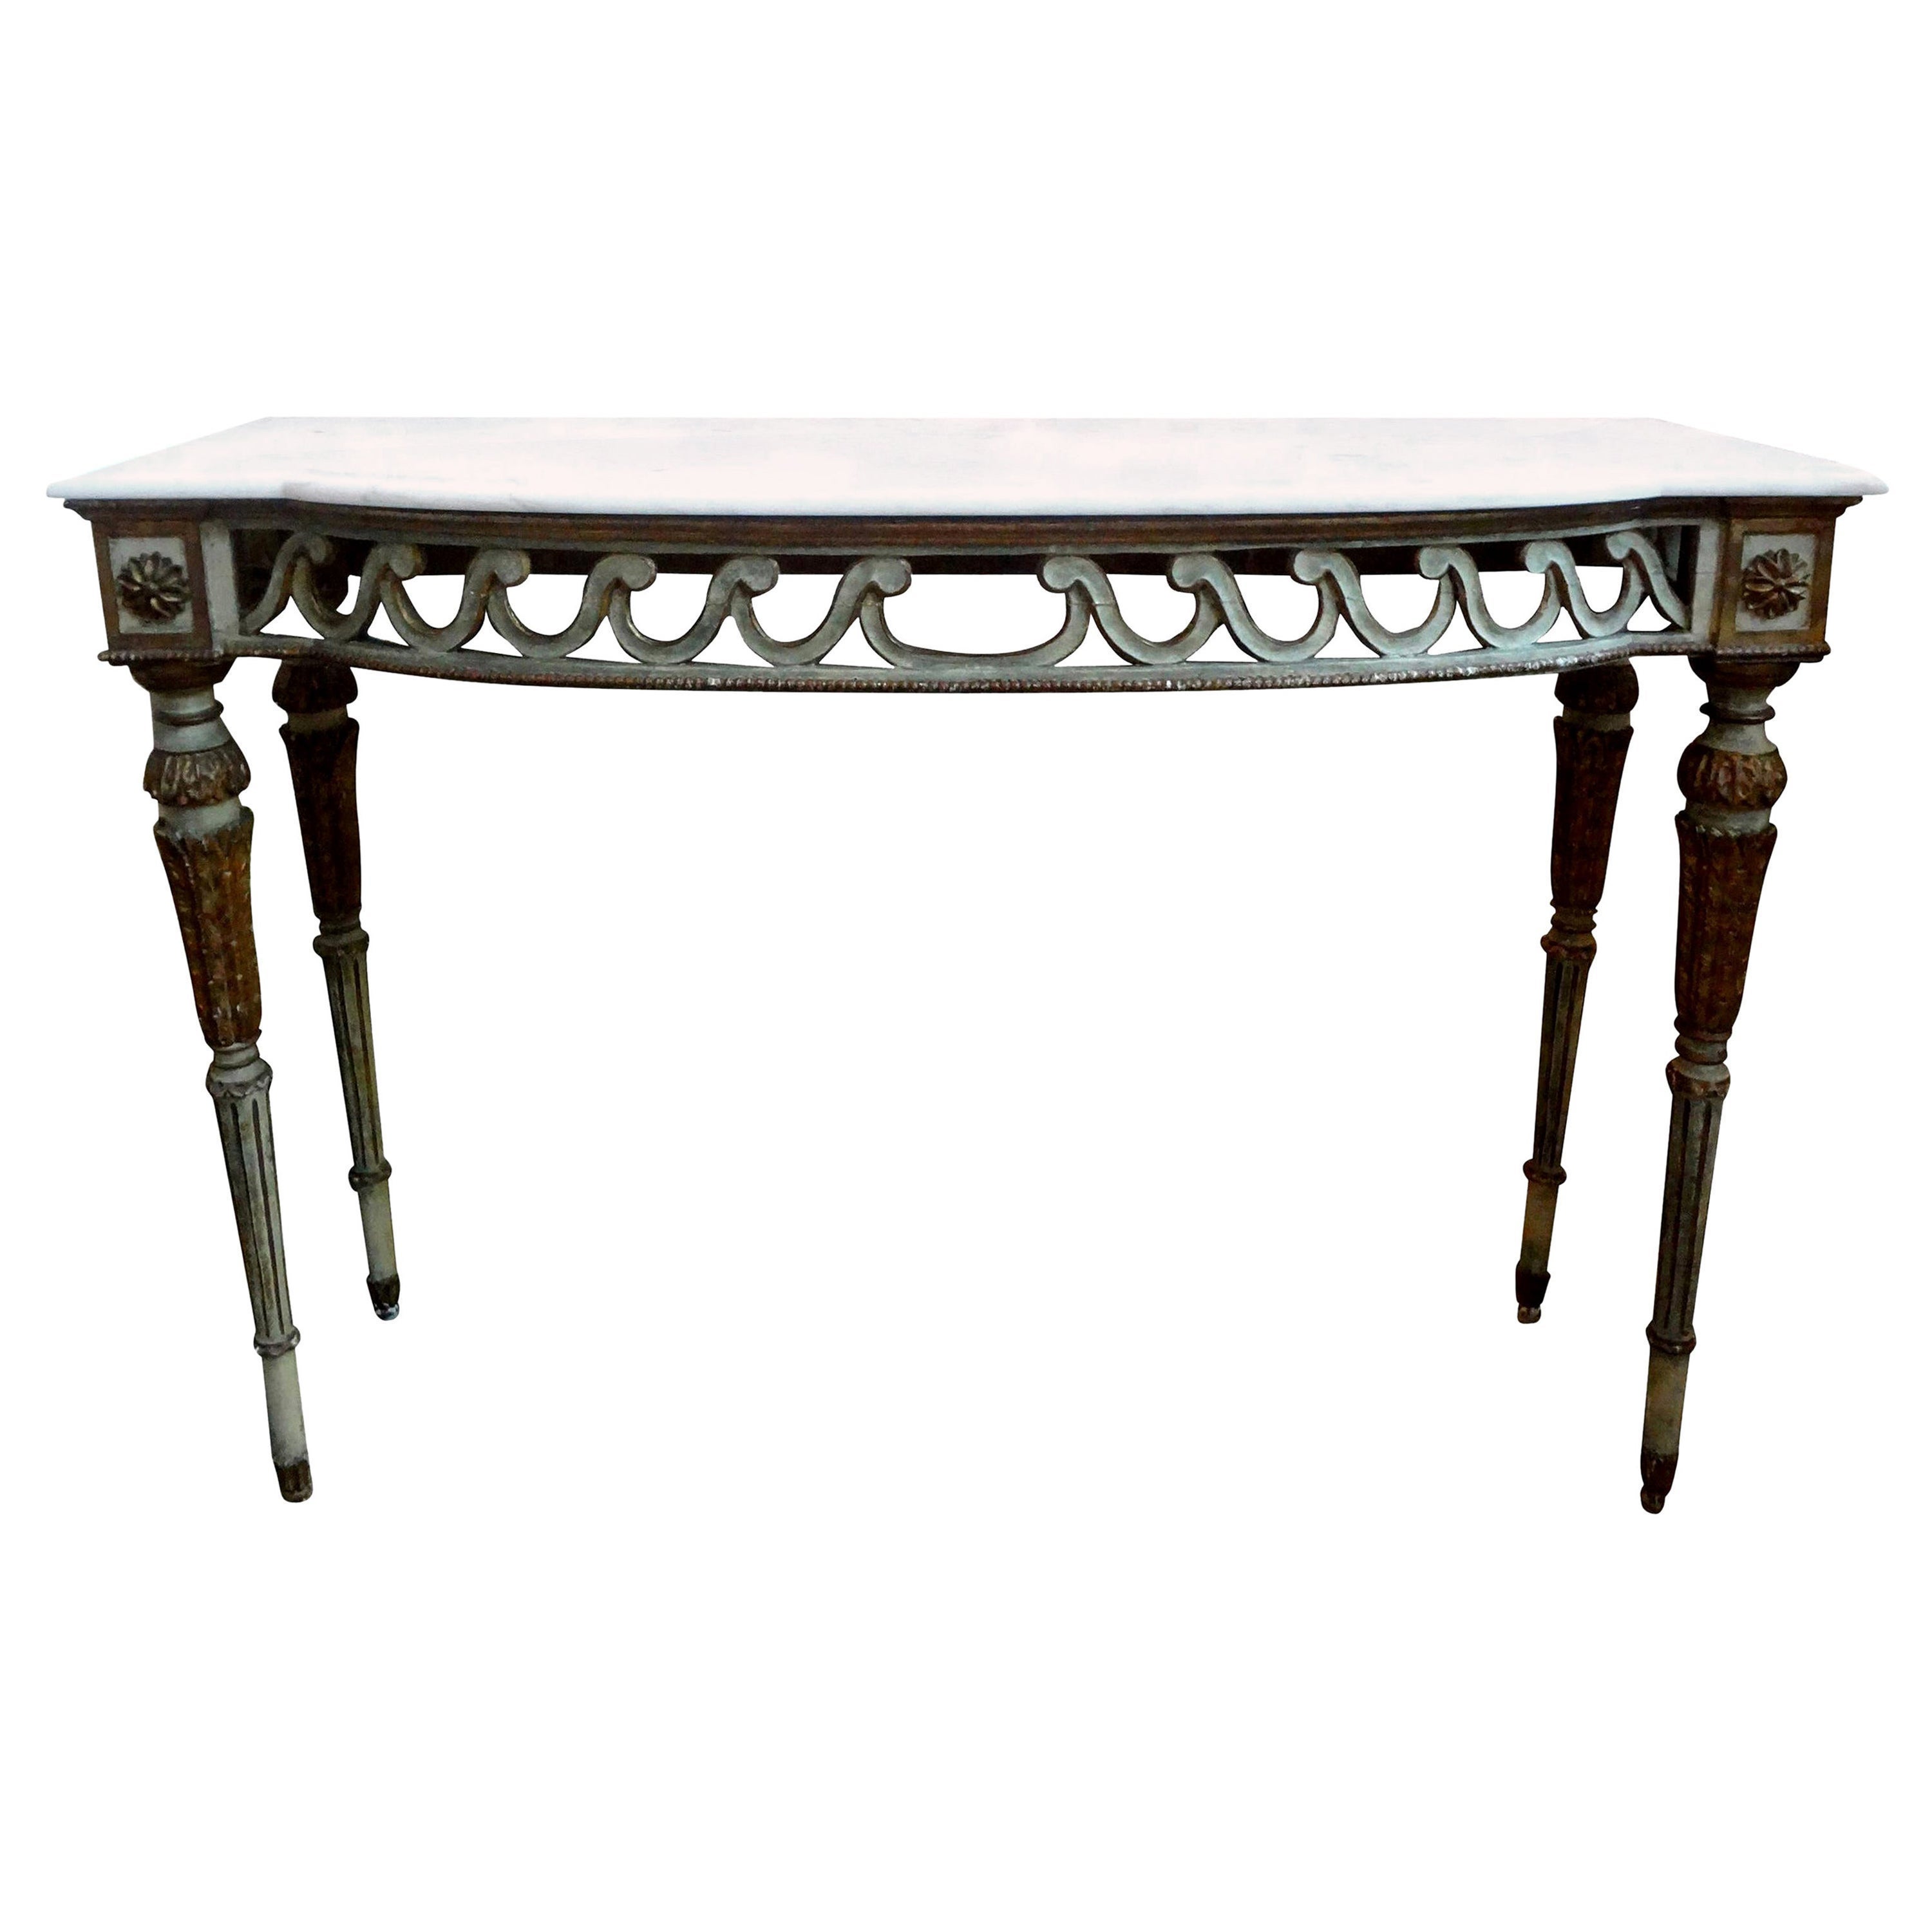 19th Century Italian Louis XVI Style Painted and Parcel-Gilt Console Table